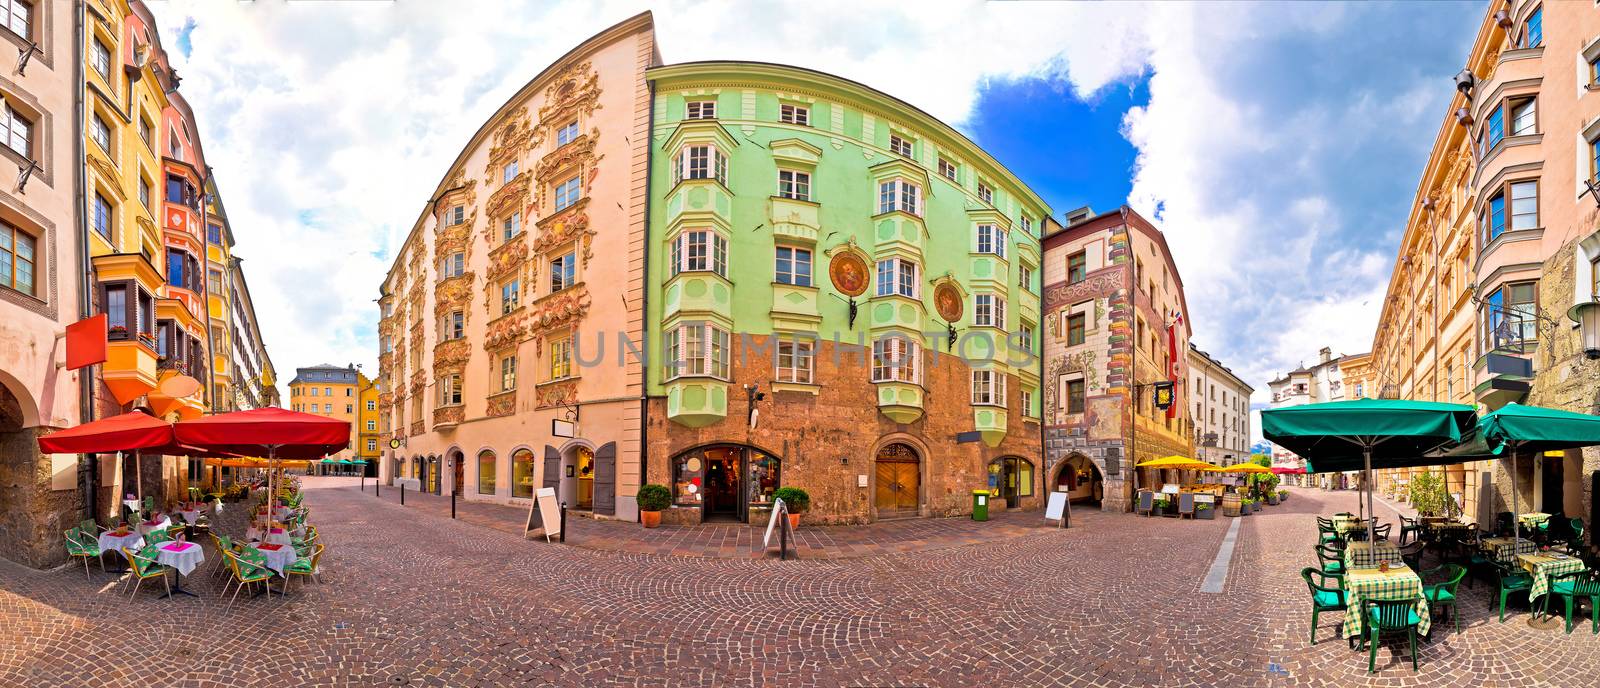 Historic street of Innsbruck panoramic view by xbrchx